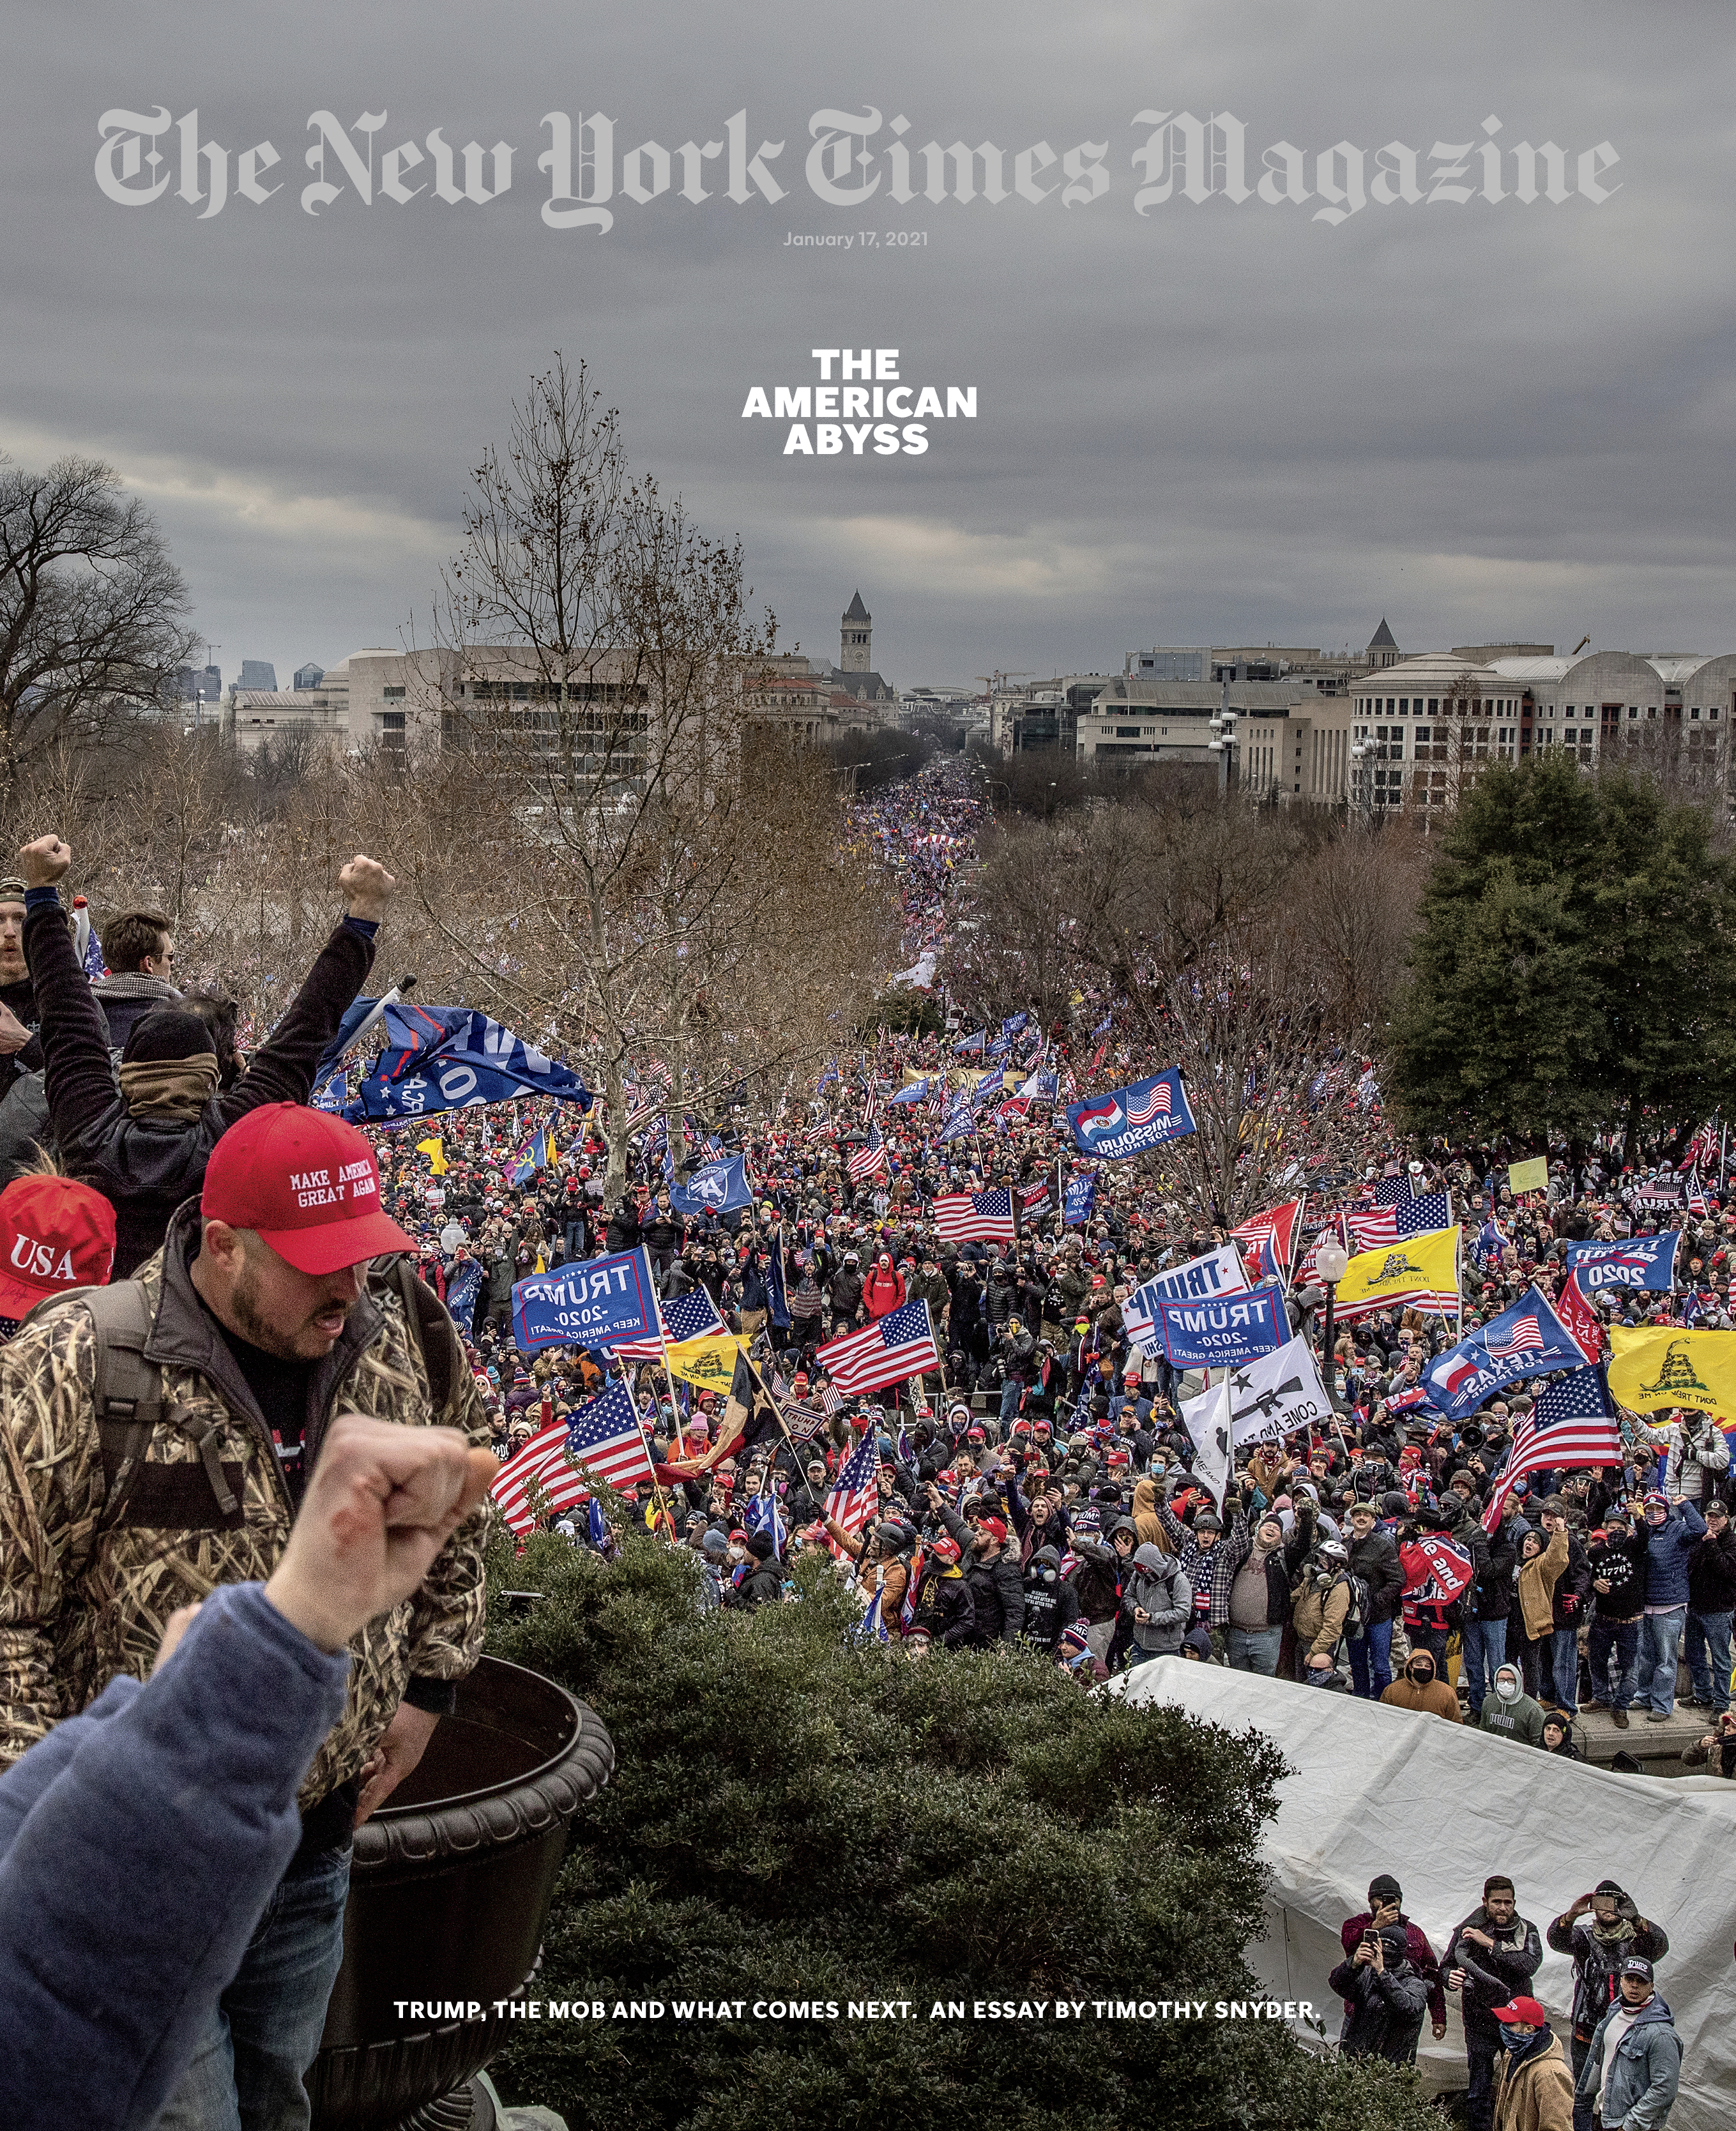 The New York Time Magazine - "The American Abyss," January 17, 2021